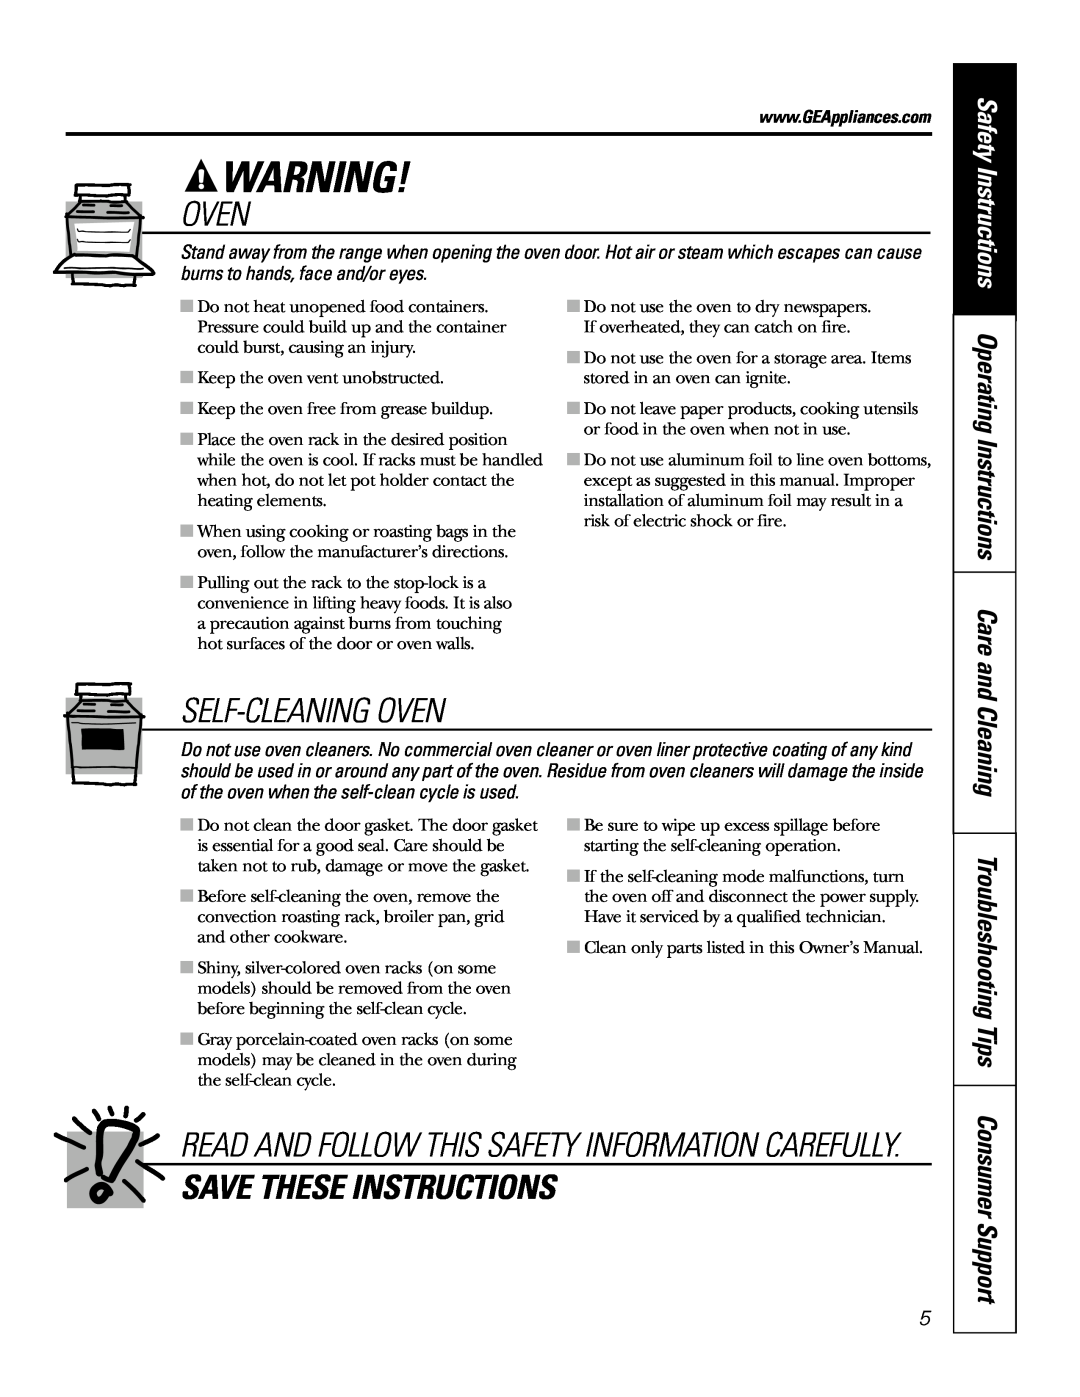 GE JB905 Self-Cleaning Oven, Save These Instructions, Troubleshooting Tips, Consumer Support, Safety Instructions 